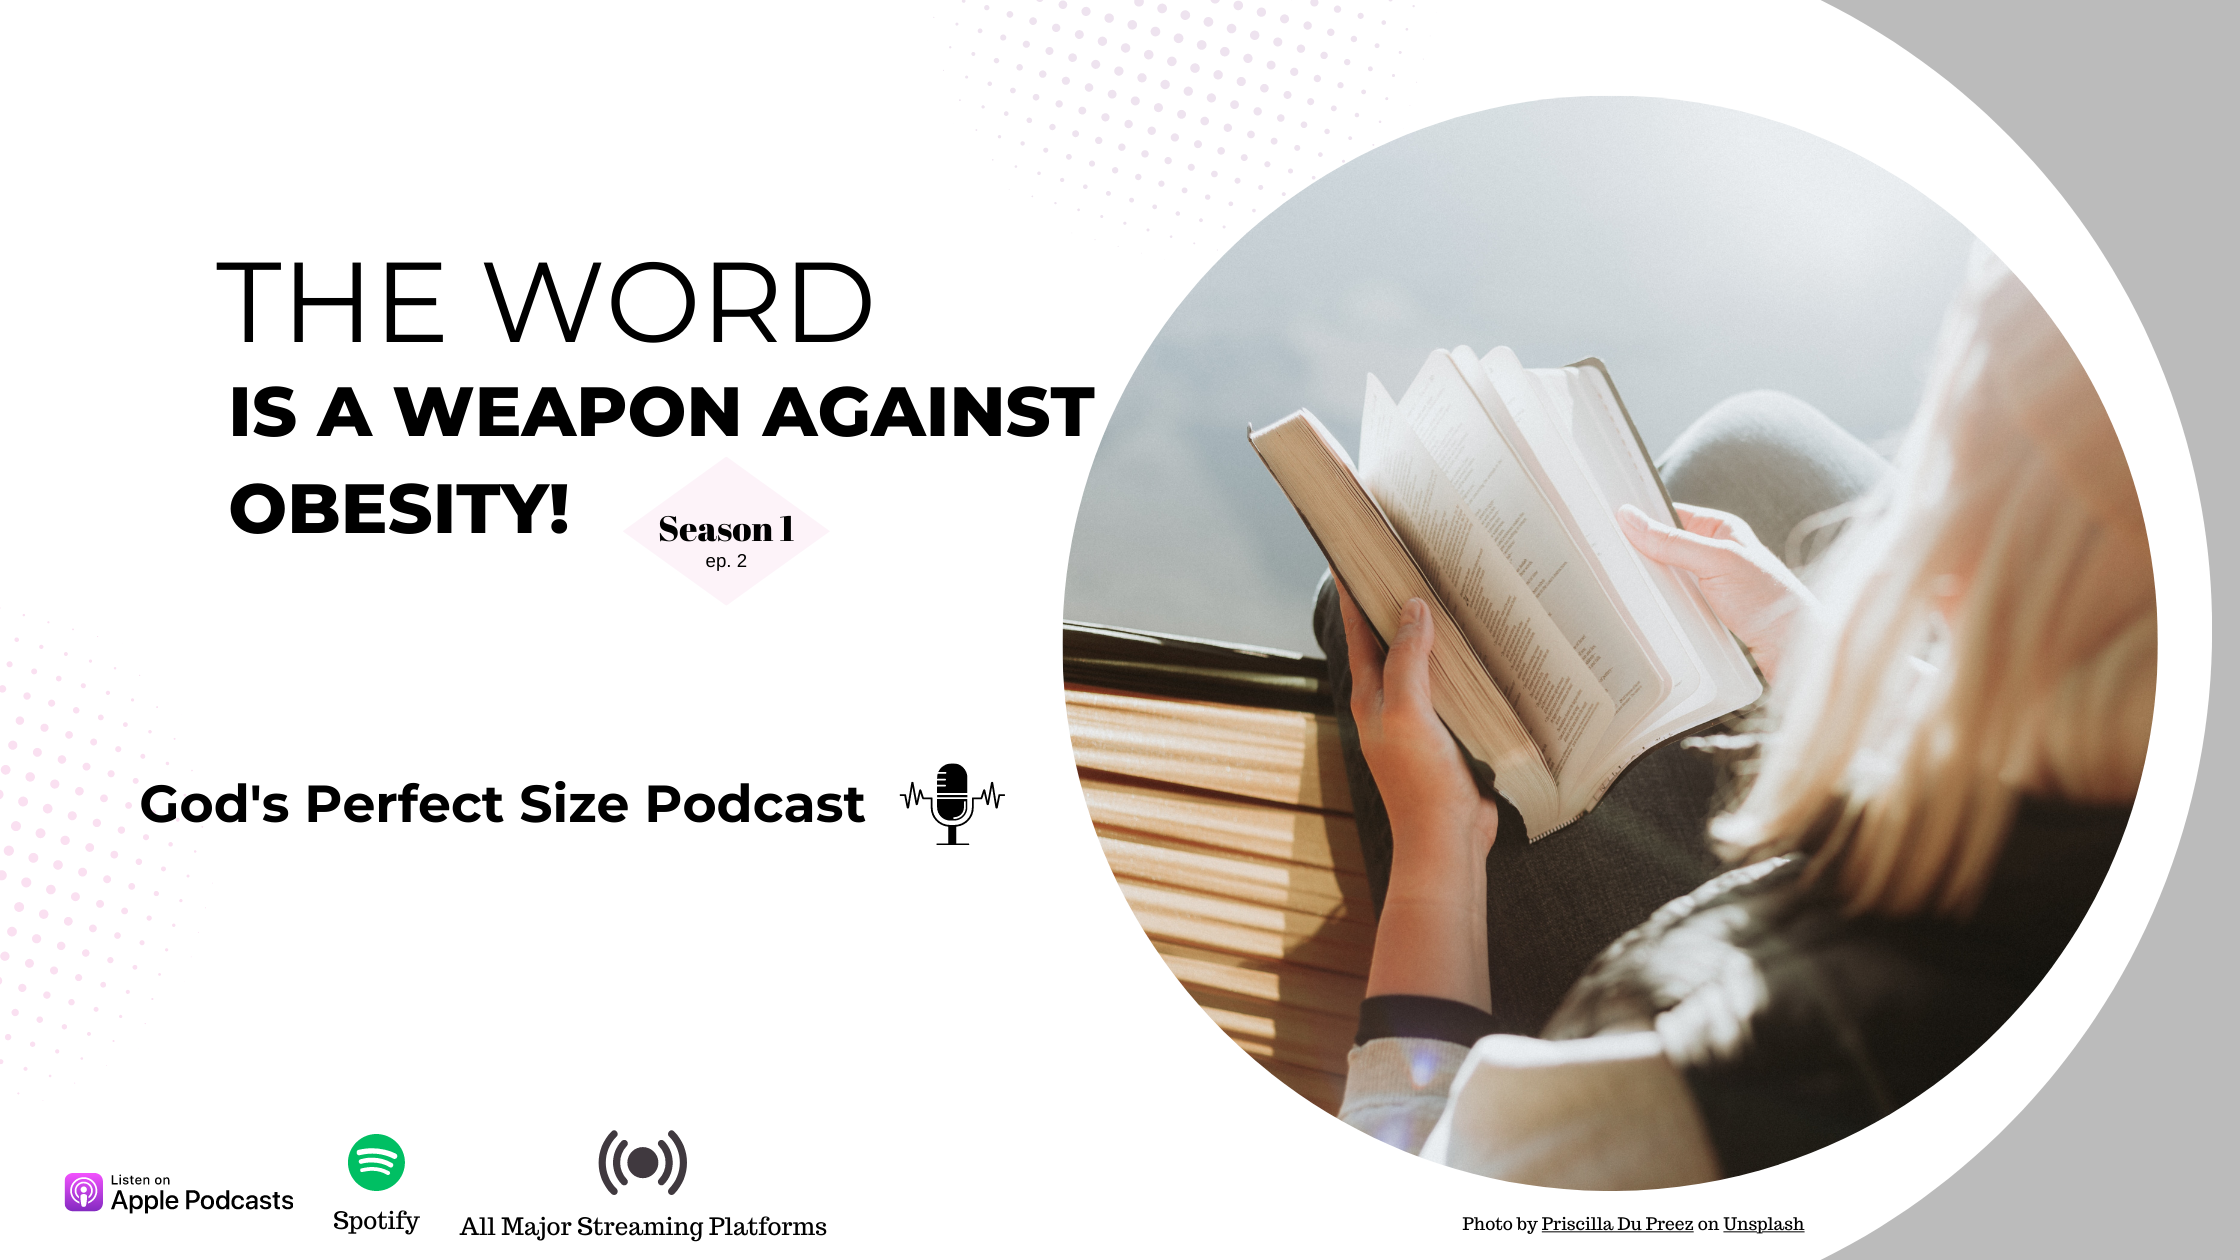 The Word Is a Weapon Against Obesity!